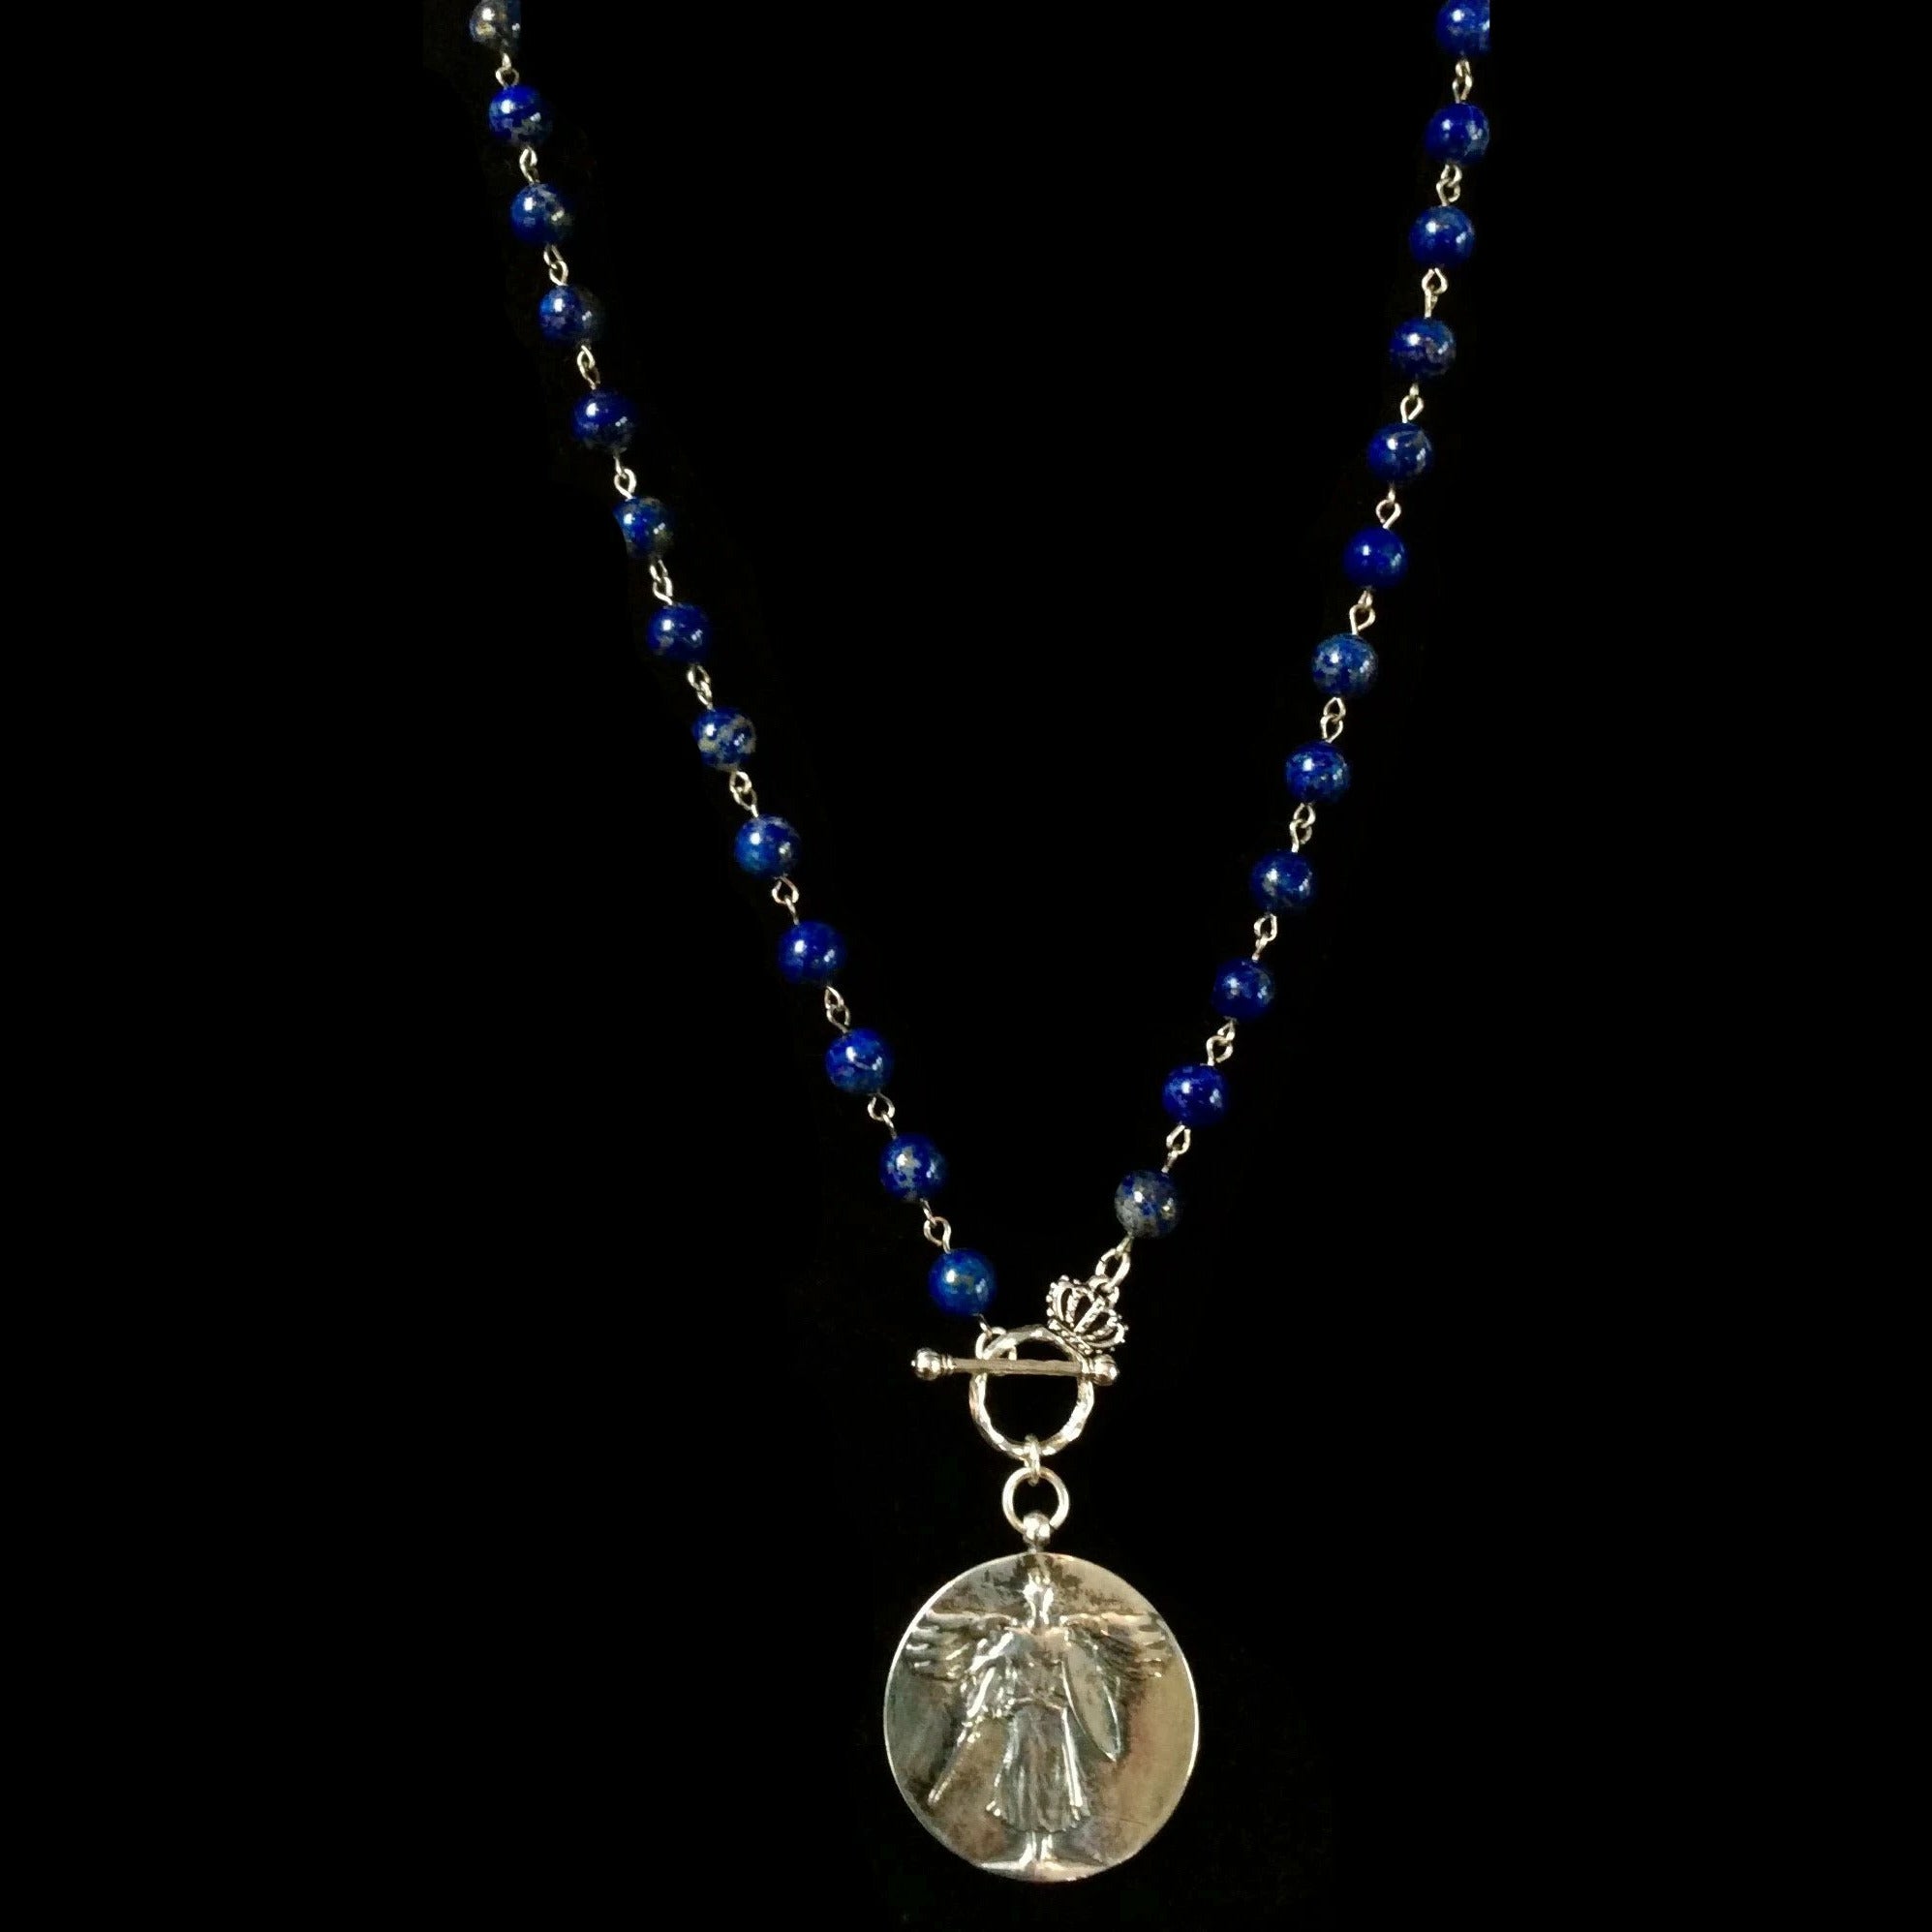 Sterling Sliver St. Michael Medallion in Lapis Lazuli with Toggle Front Necklace